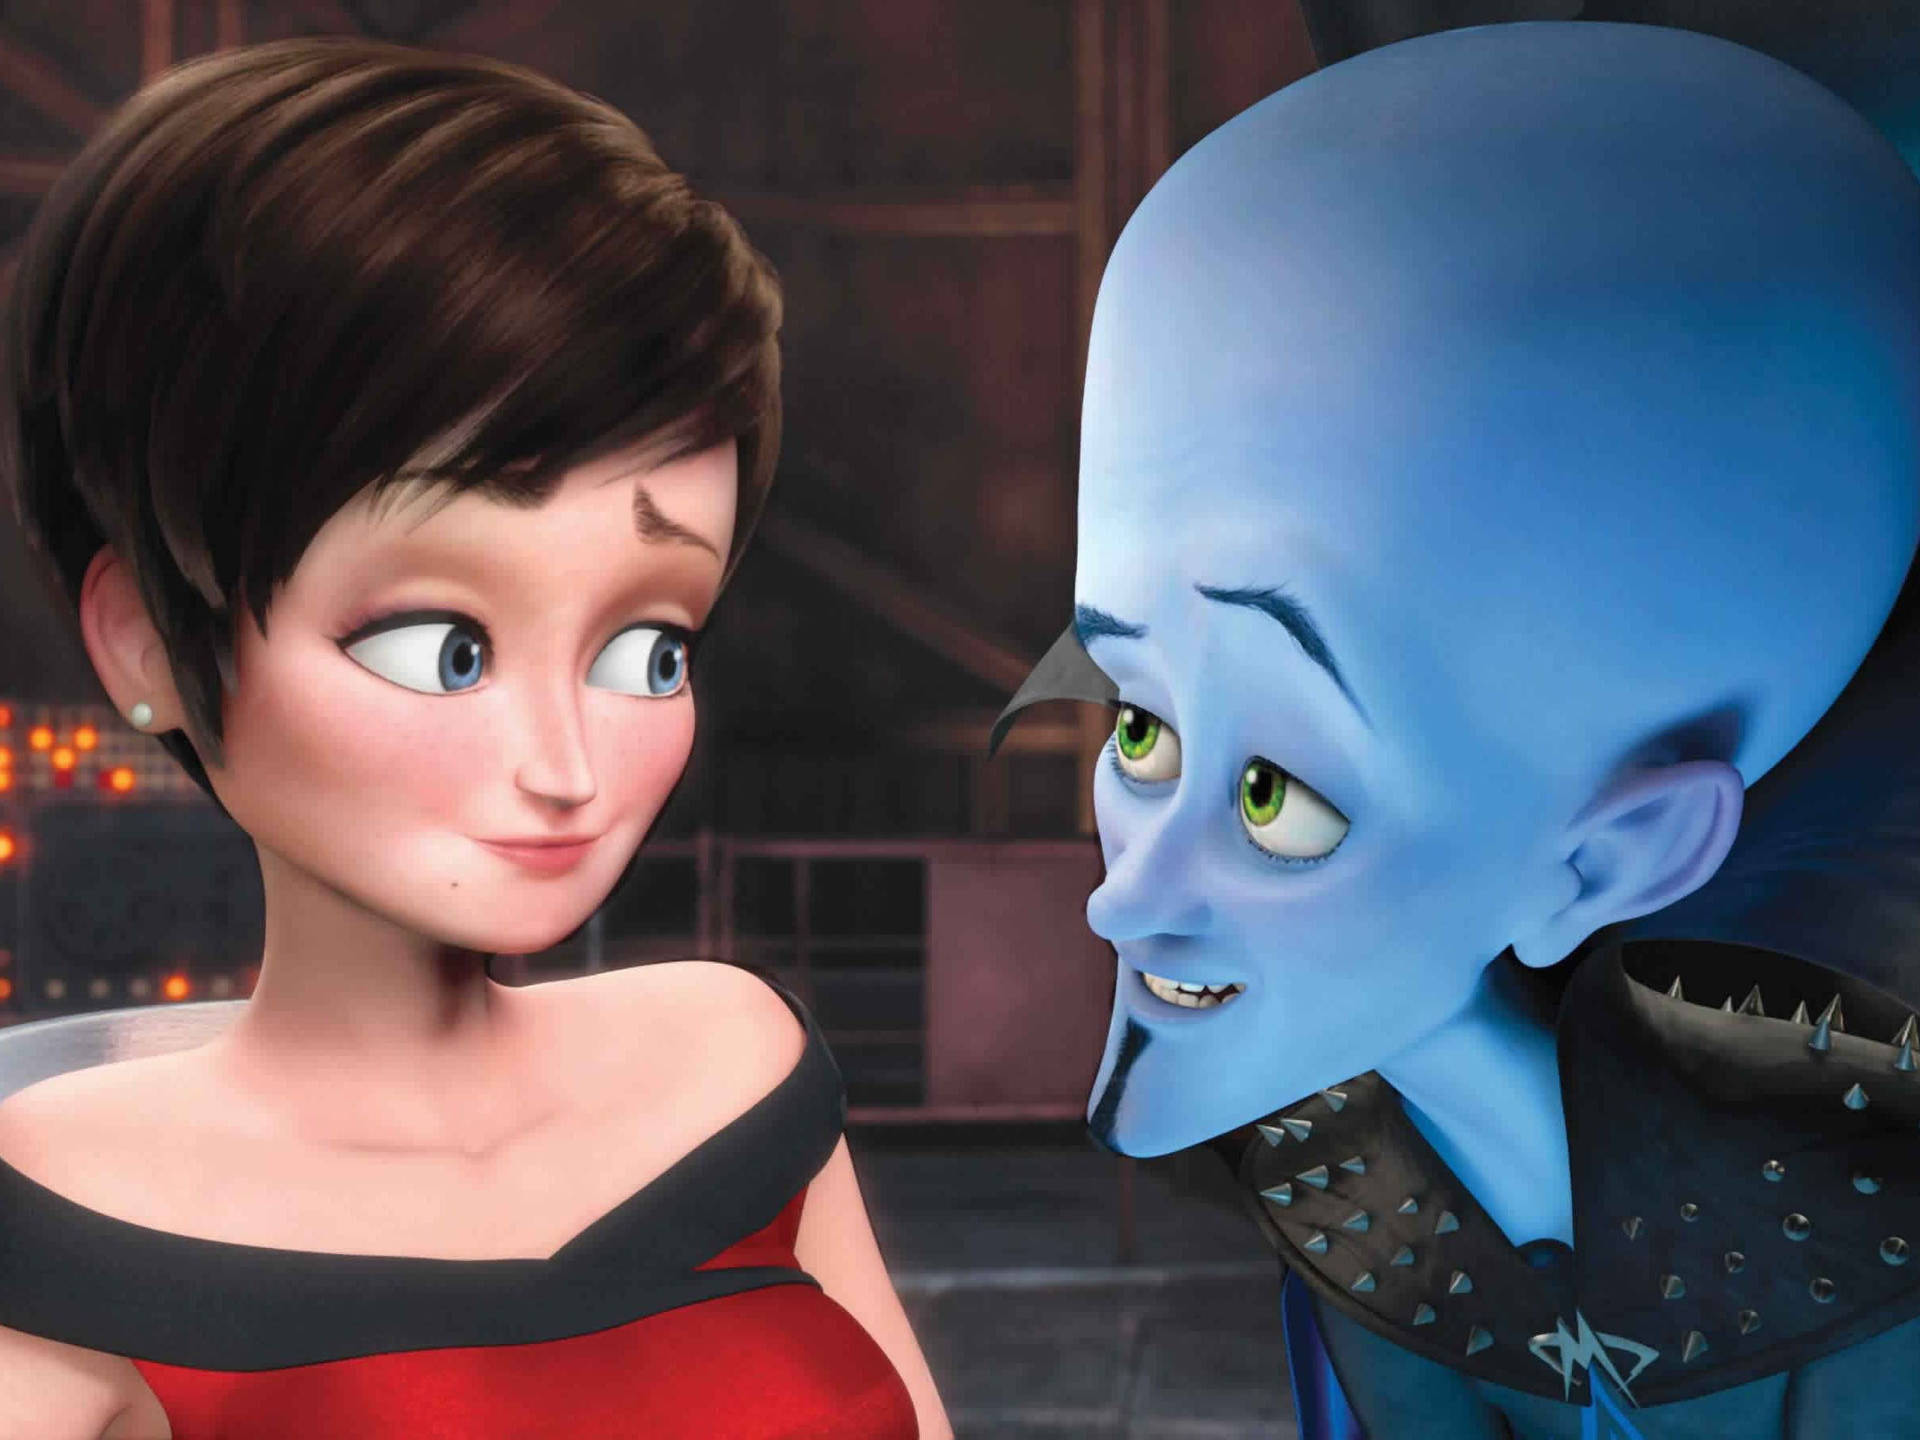 Download Megamind wallpapers for mobile phone free Megamind HD pictures